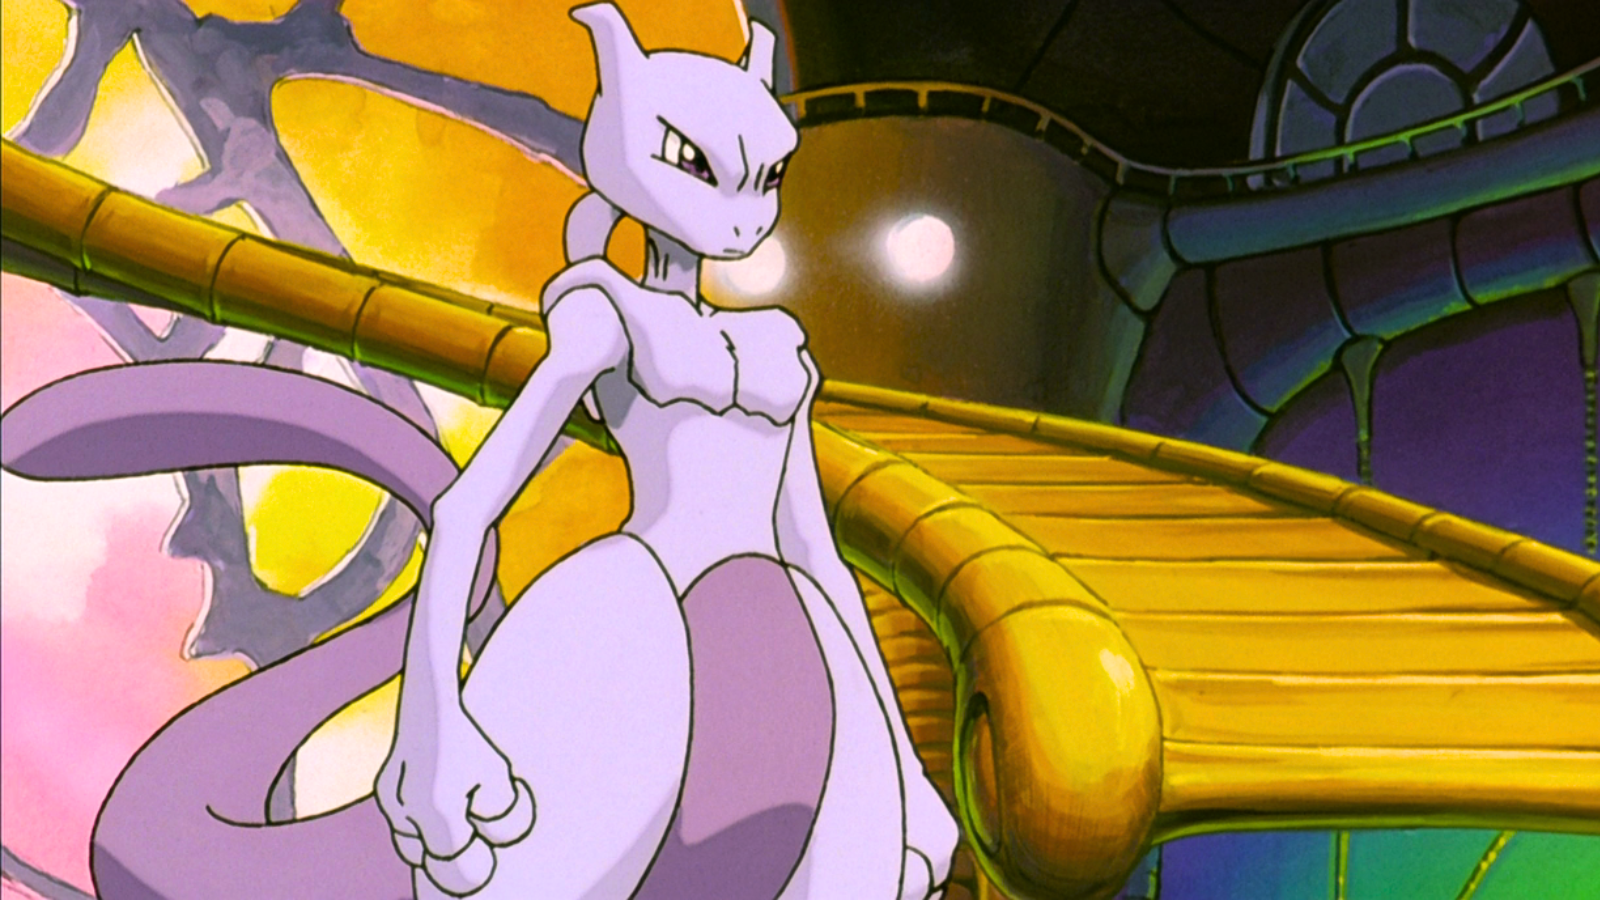 How to beat Mewtwo in Pokémon Scarlet and Violet - Video Games on